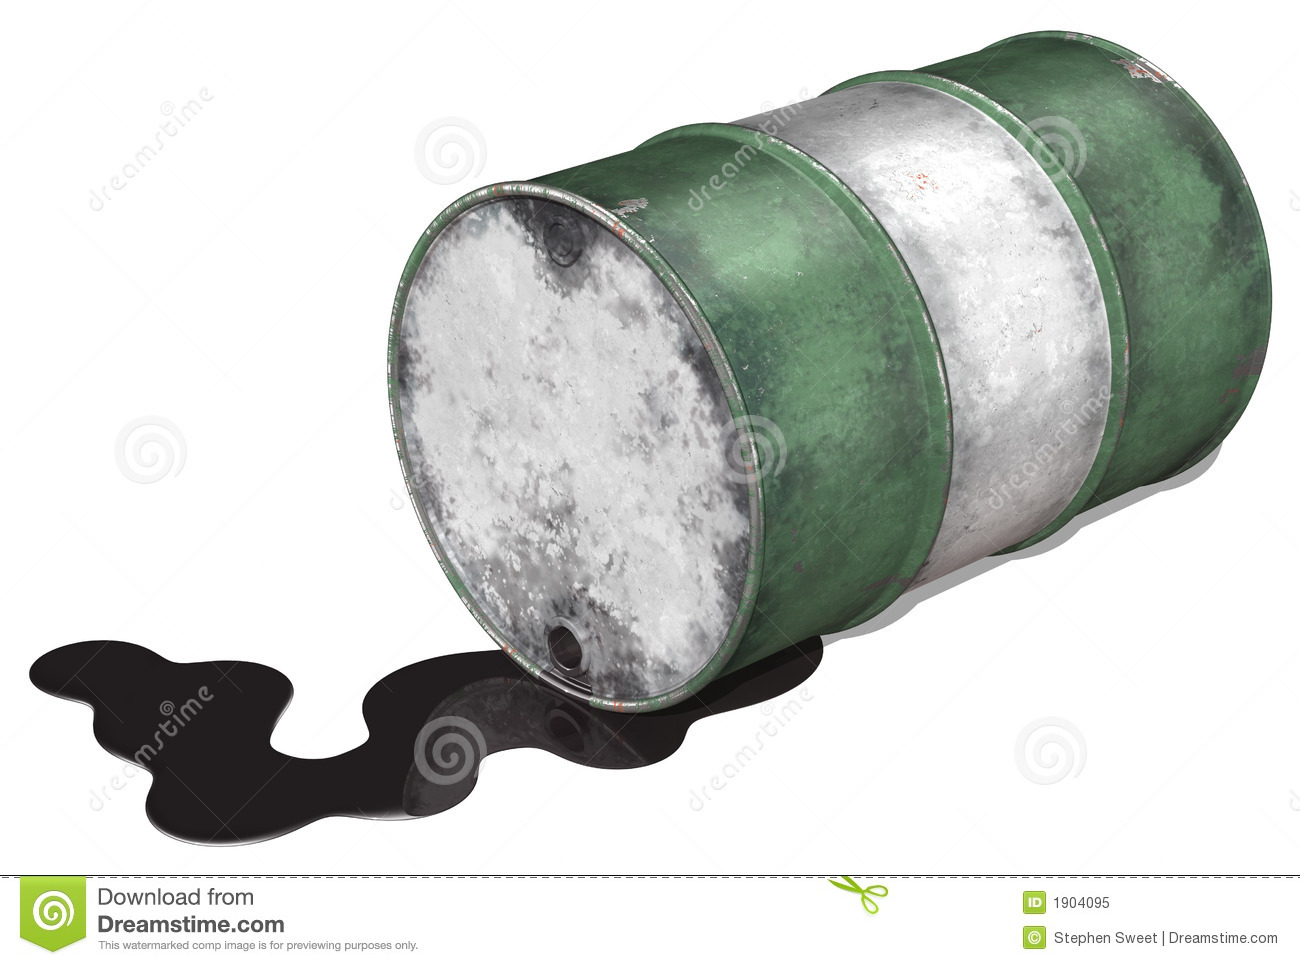 3d Illustration Of An Old Oil Barrel With Oil Spilled On The Ground